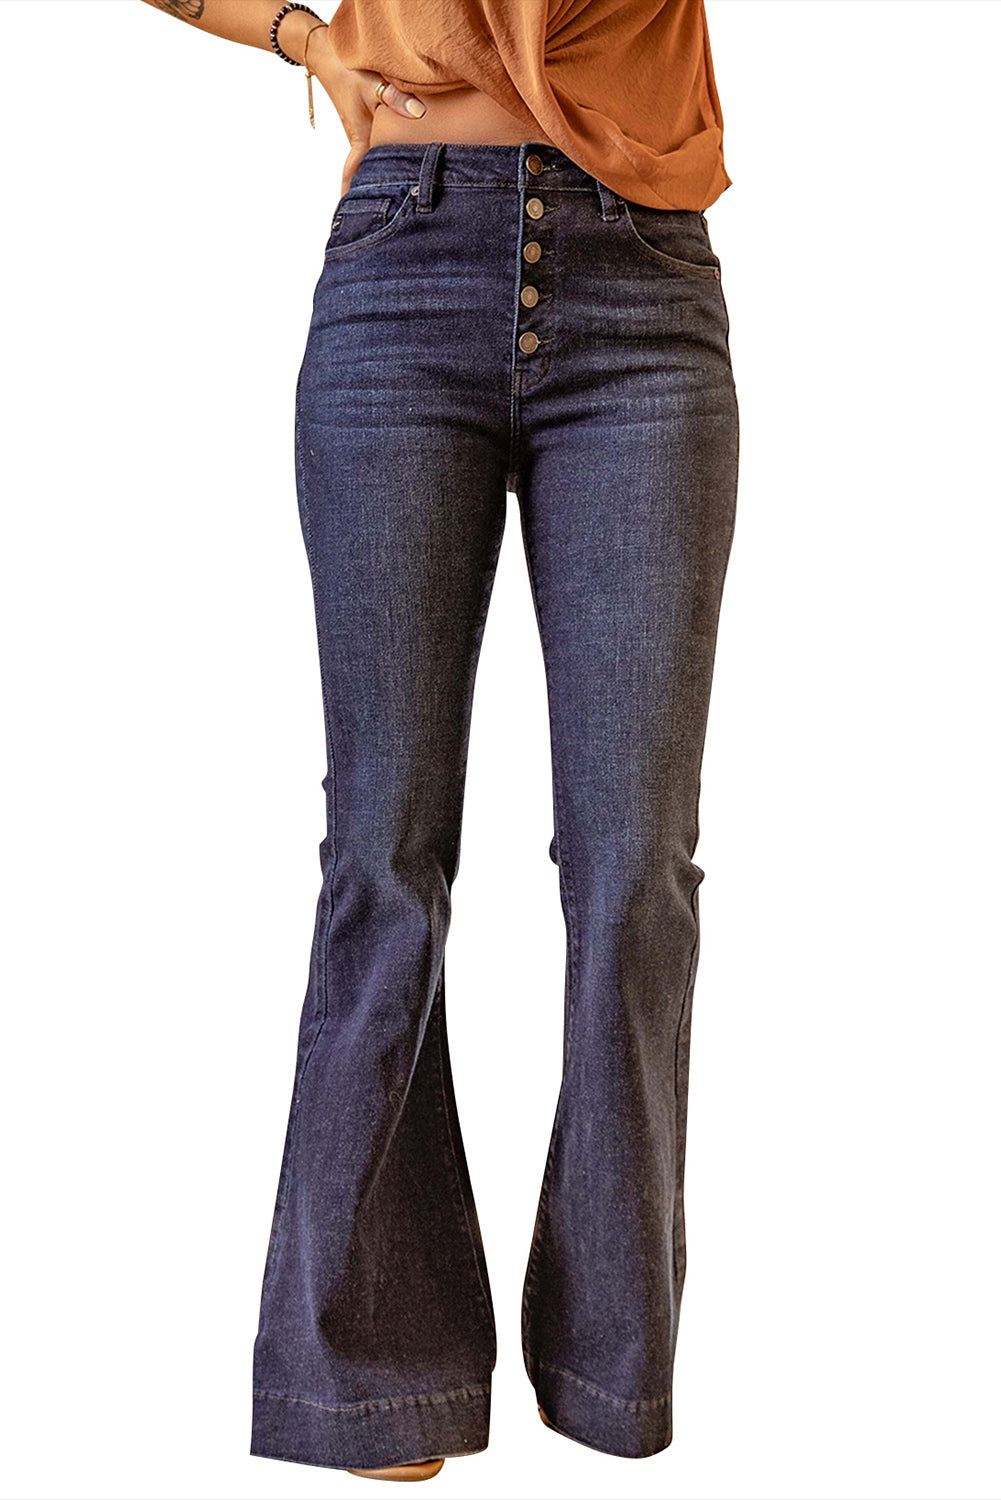 Blue Button Raw Hem Flared Jeans with Pockets Jeans JT's Designer Fashion